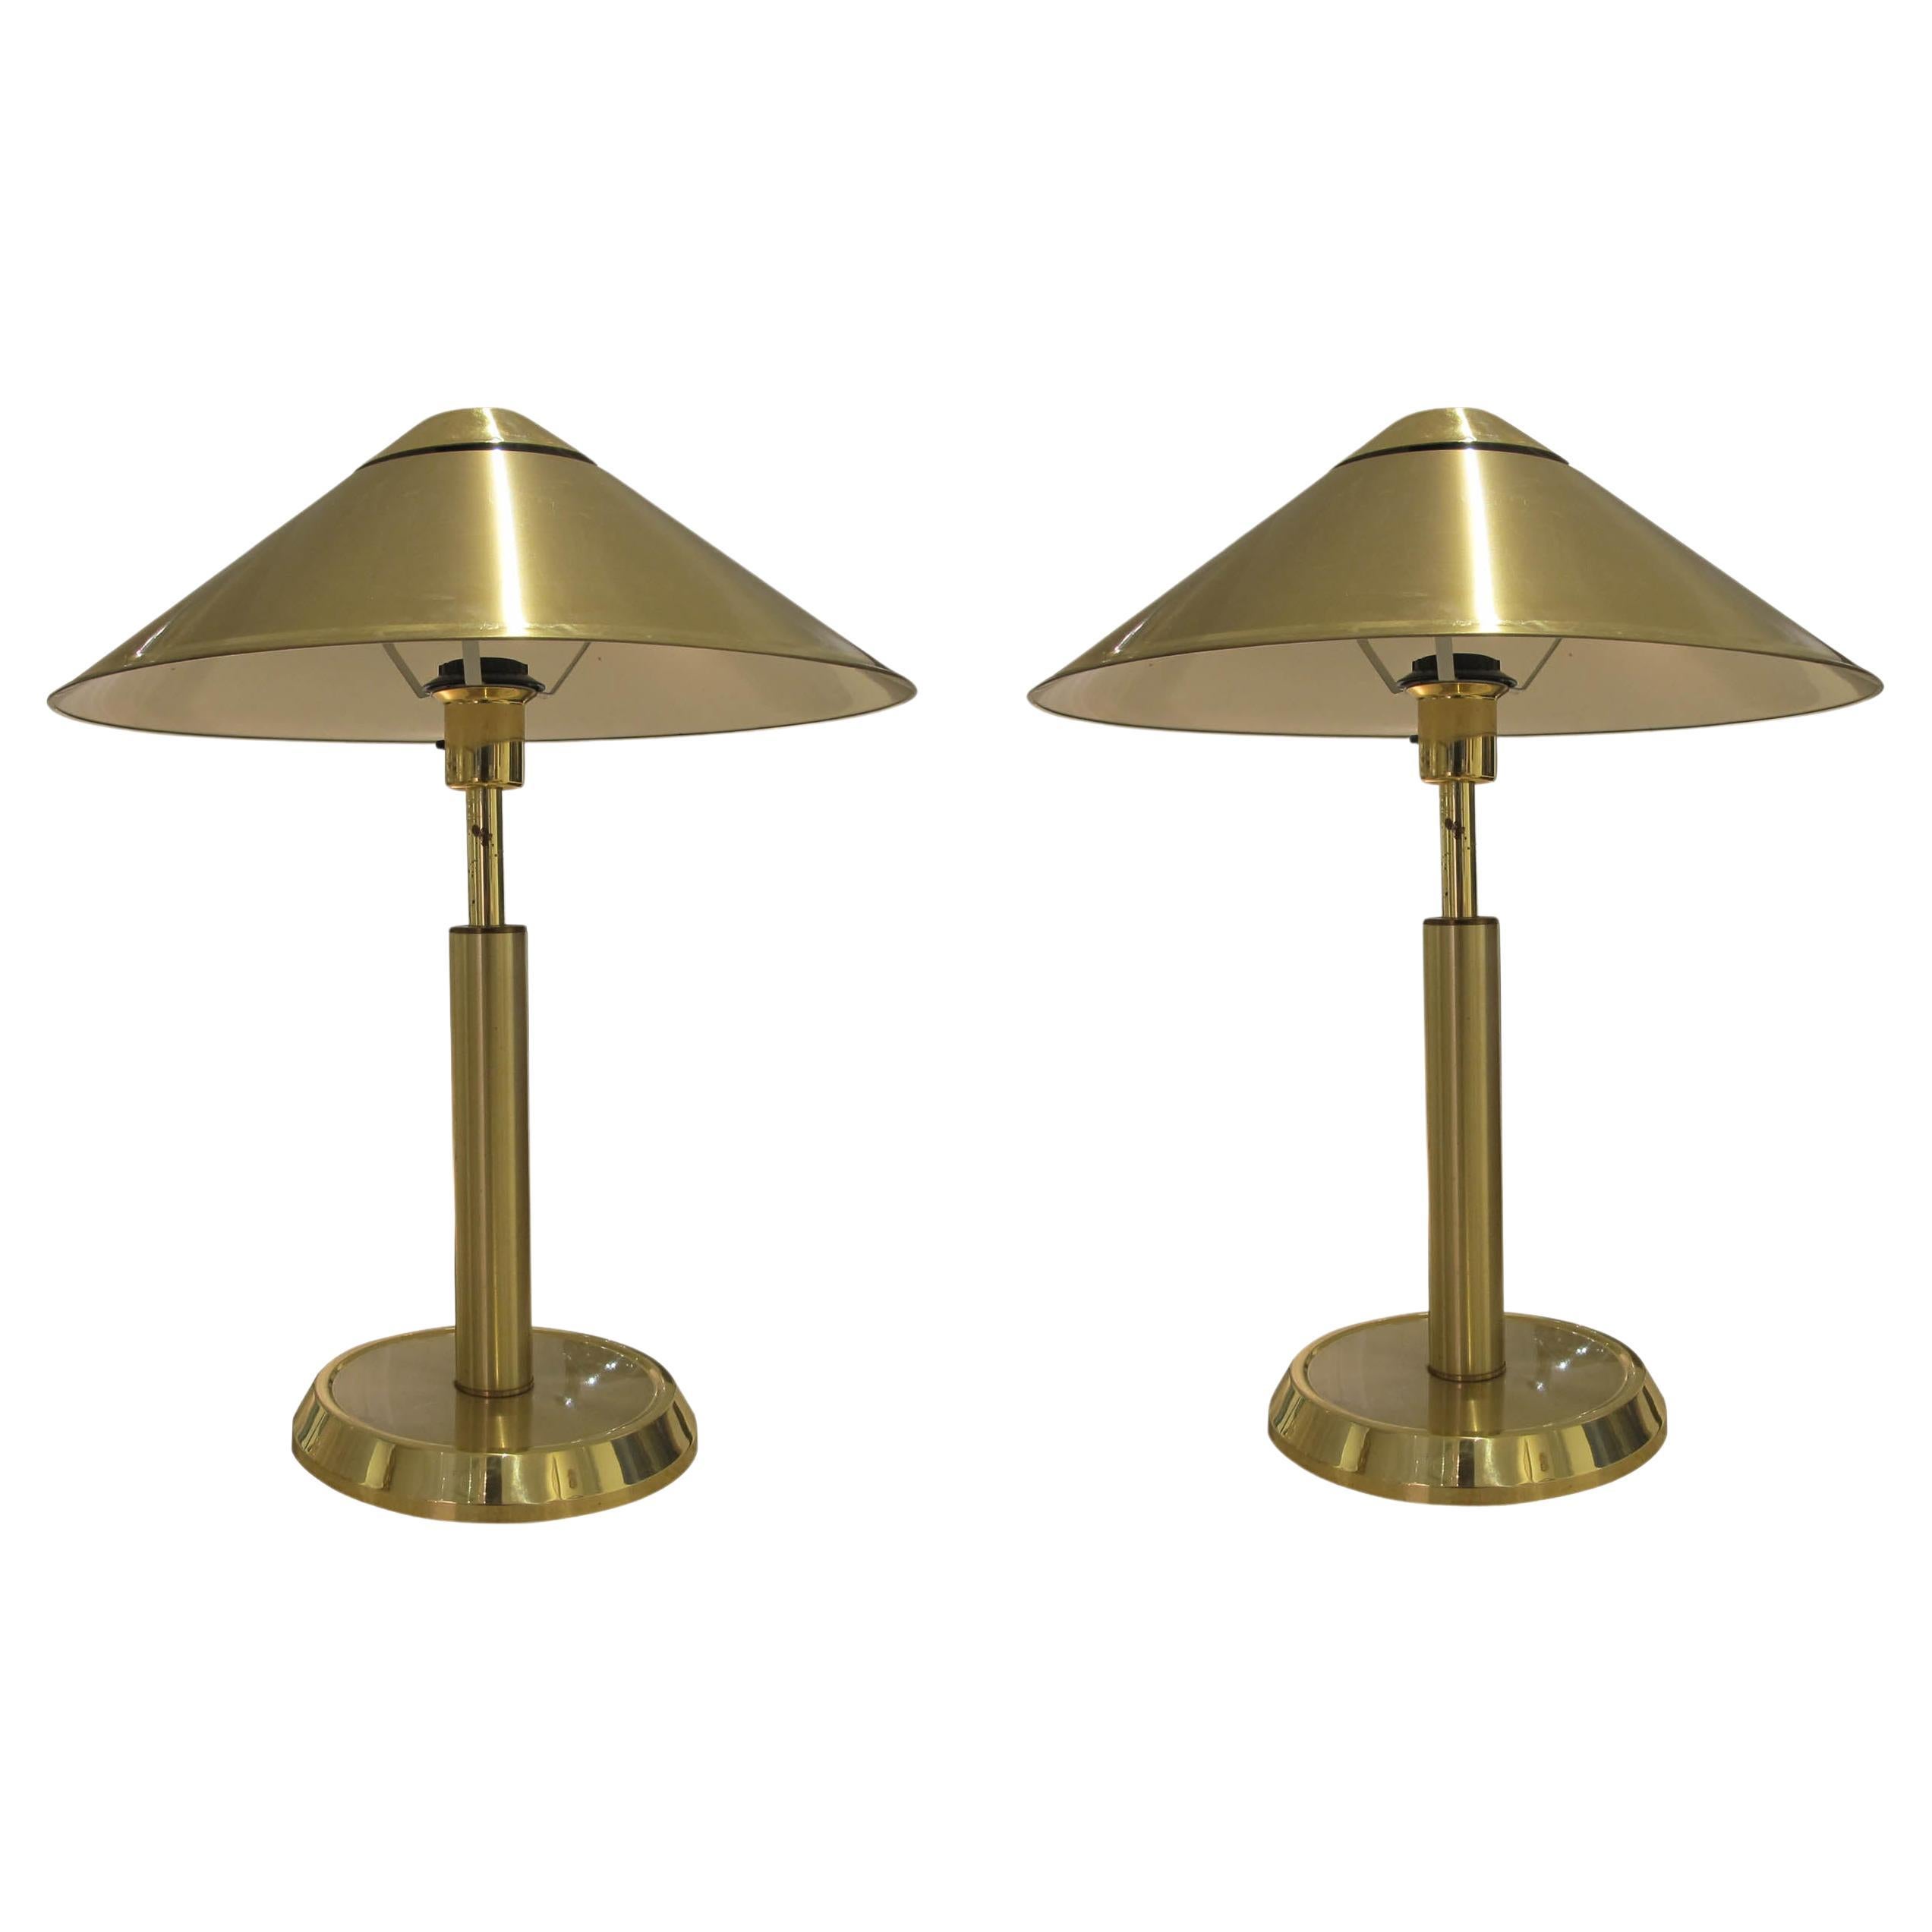 1970s Swedish Large Pair Of Brass Table Lamps With Cone Shaped Shades For Sale